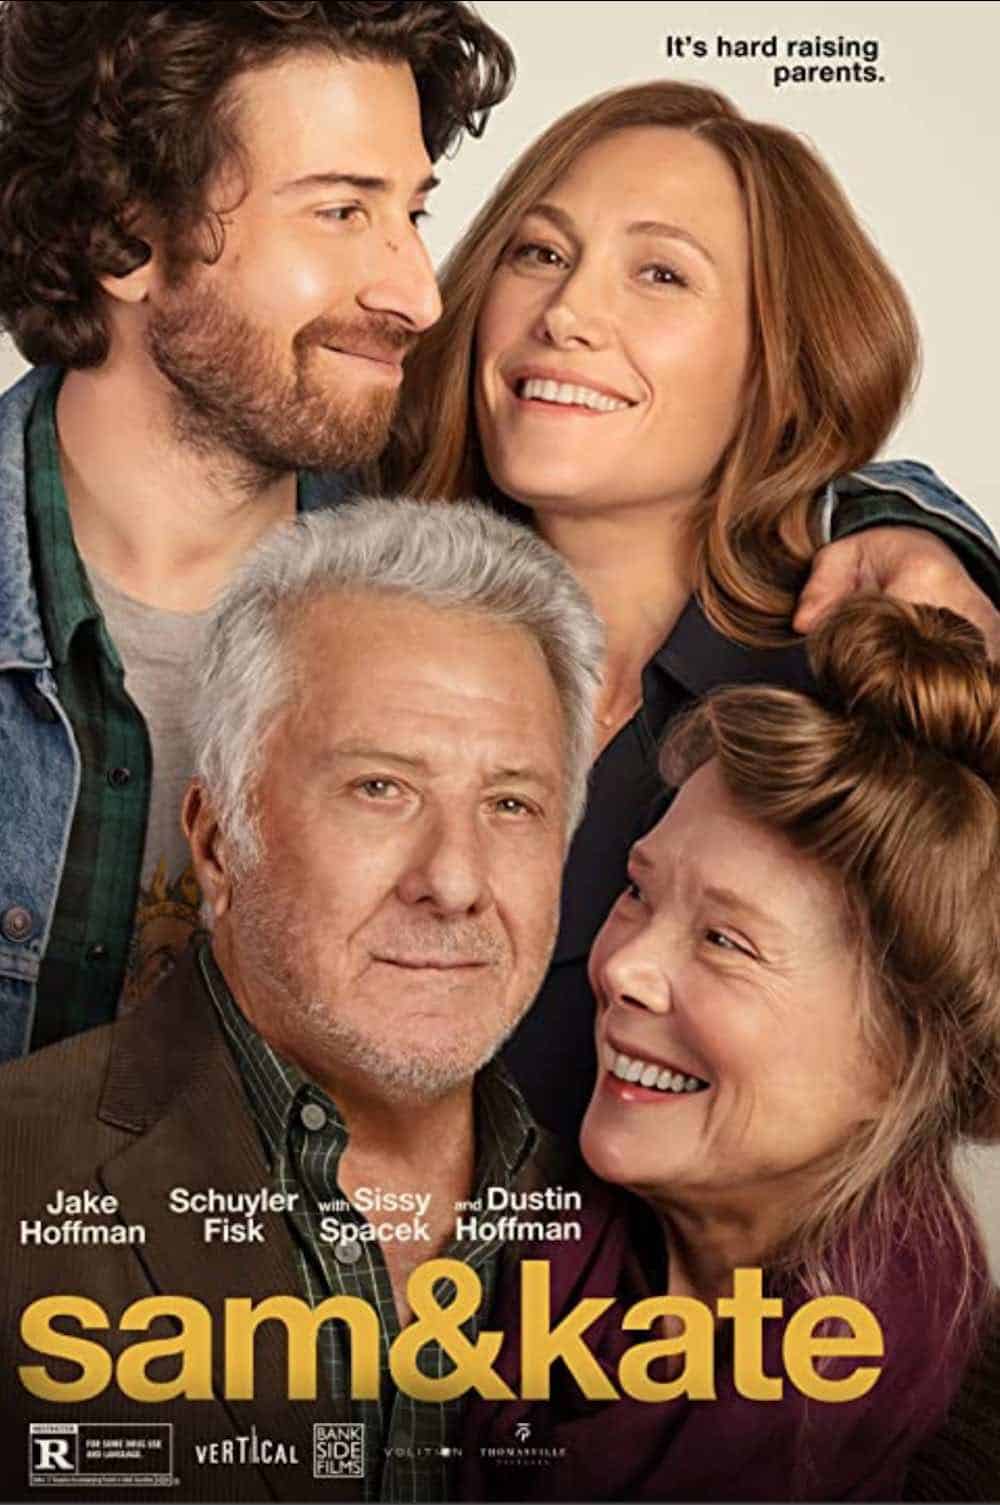 The poster for Sam and Kate features the four main characters in smiling poses